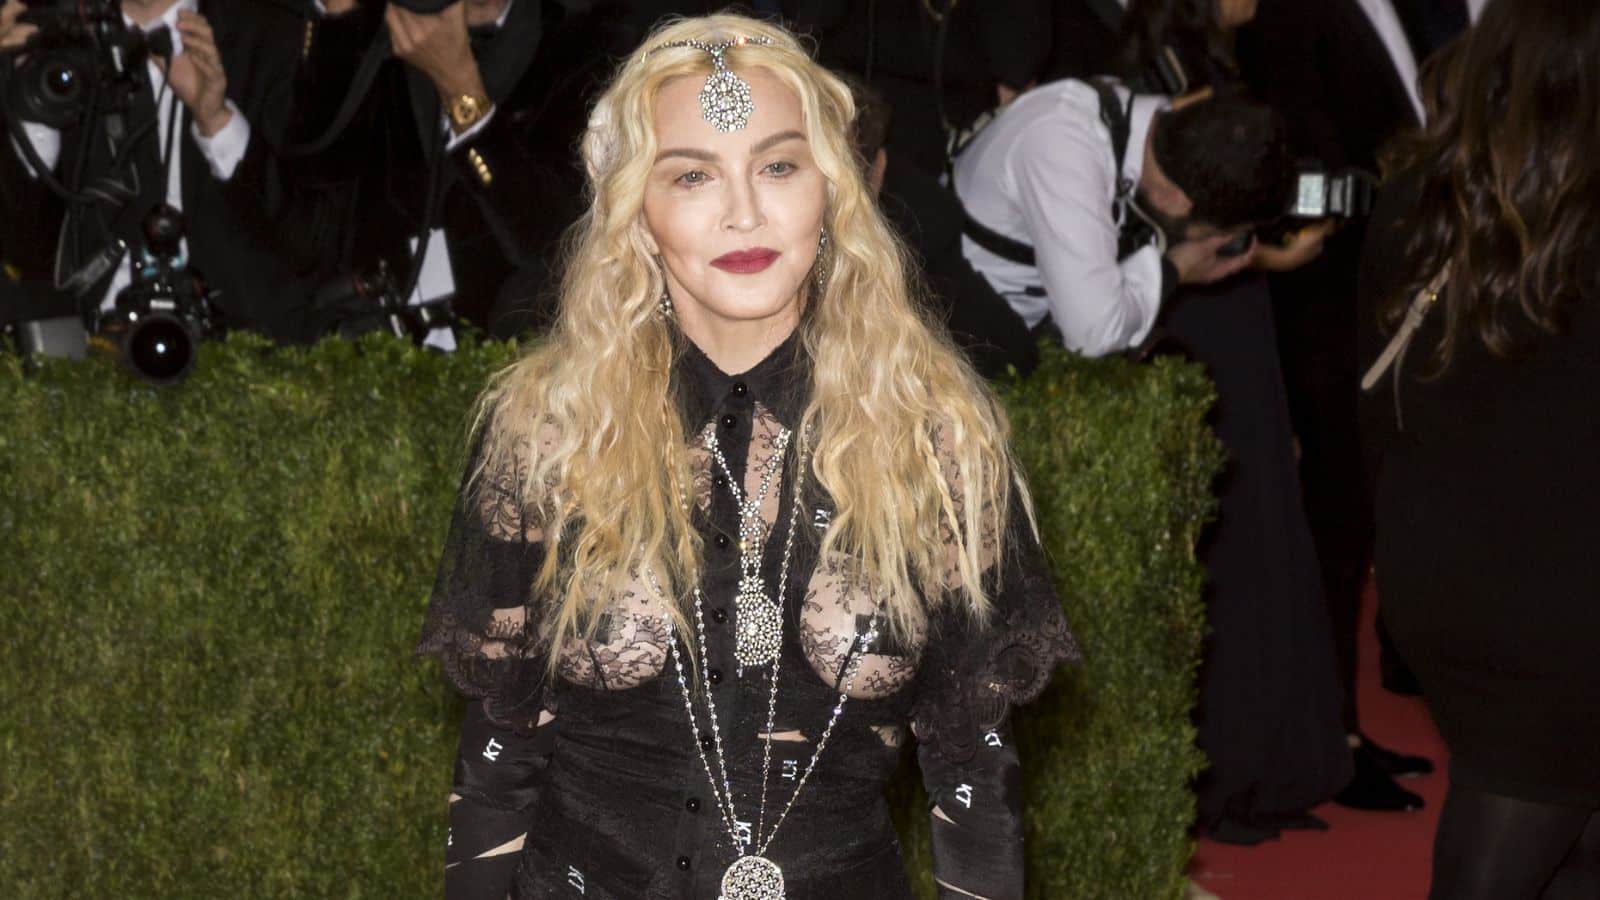 New York City, USA - May 2, 2016: Madonna attends the Manus x Machina Fashion in an Age of Technology Costume Institute Gala at the Metropolitan Museum of Art